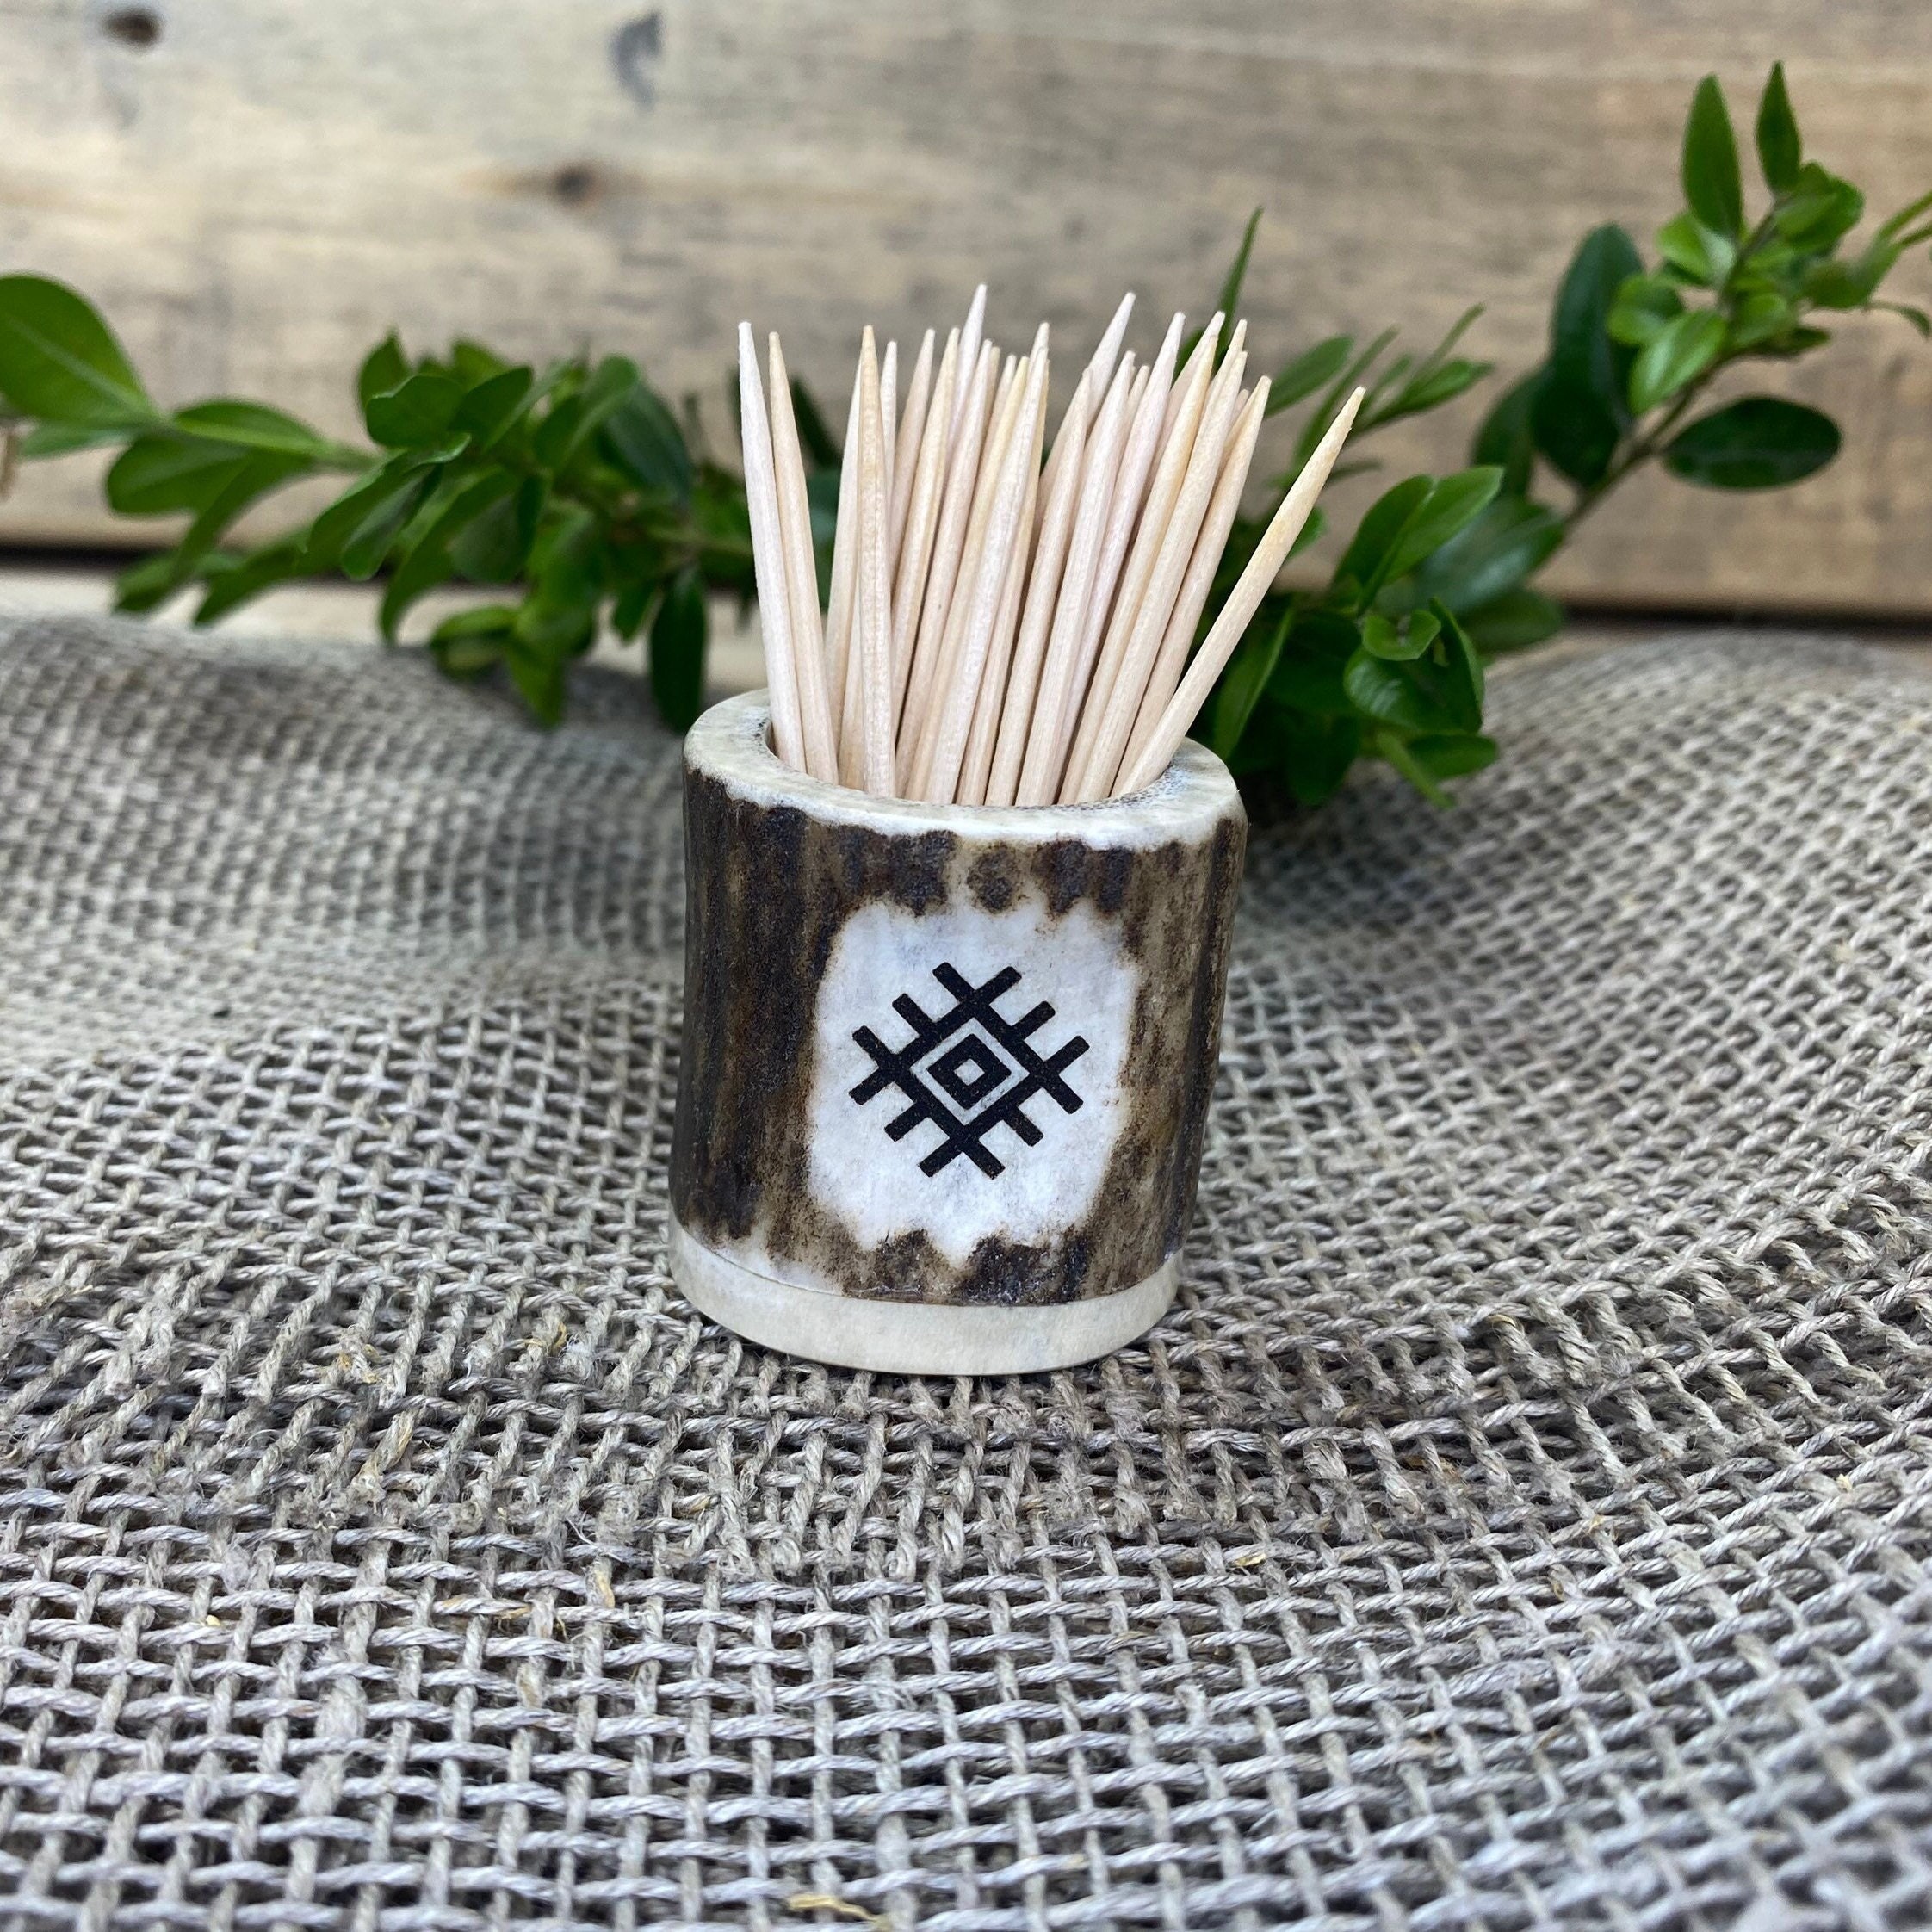 Sleek Design Silver Plated Toothpick Holder. Can Be Engraved With